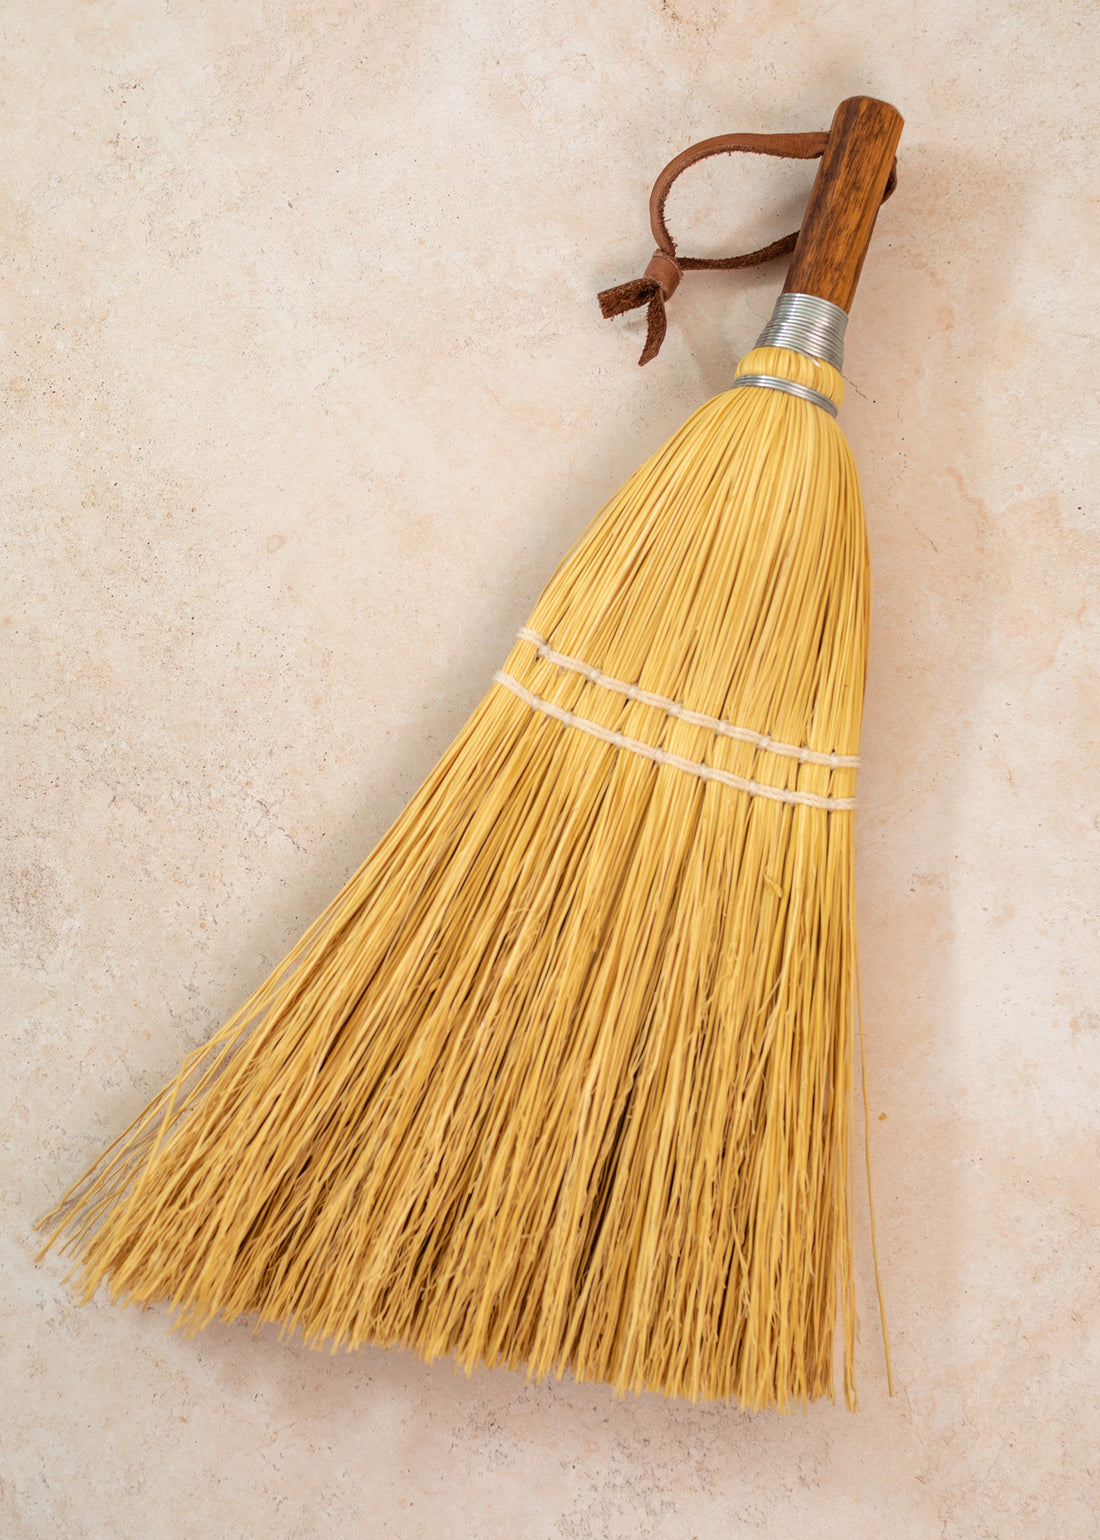 photo of a hand broom laying on a faint pink background